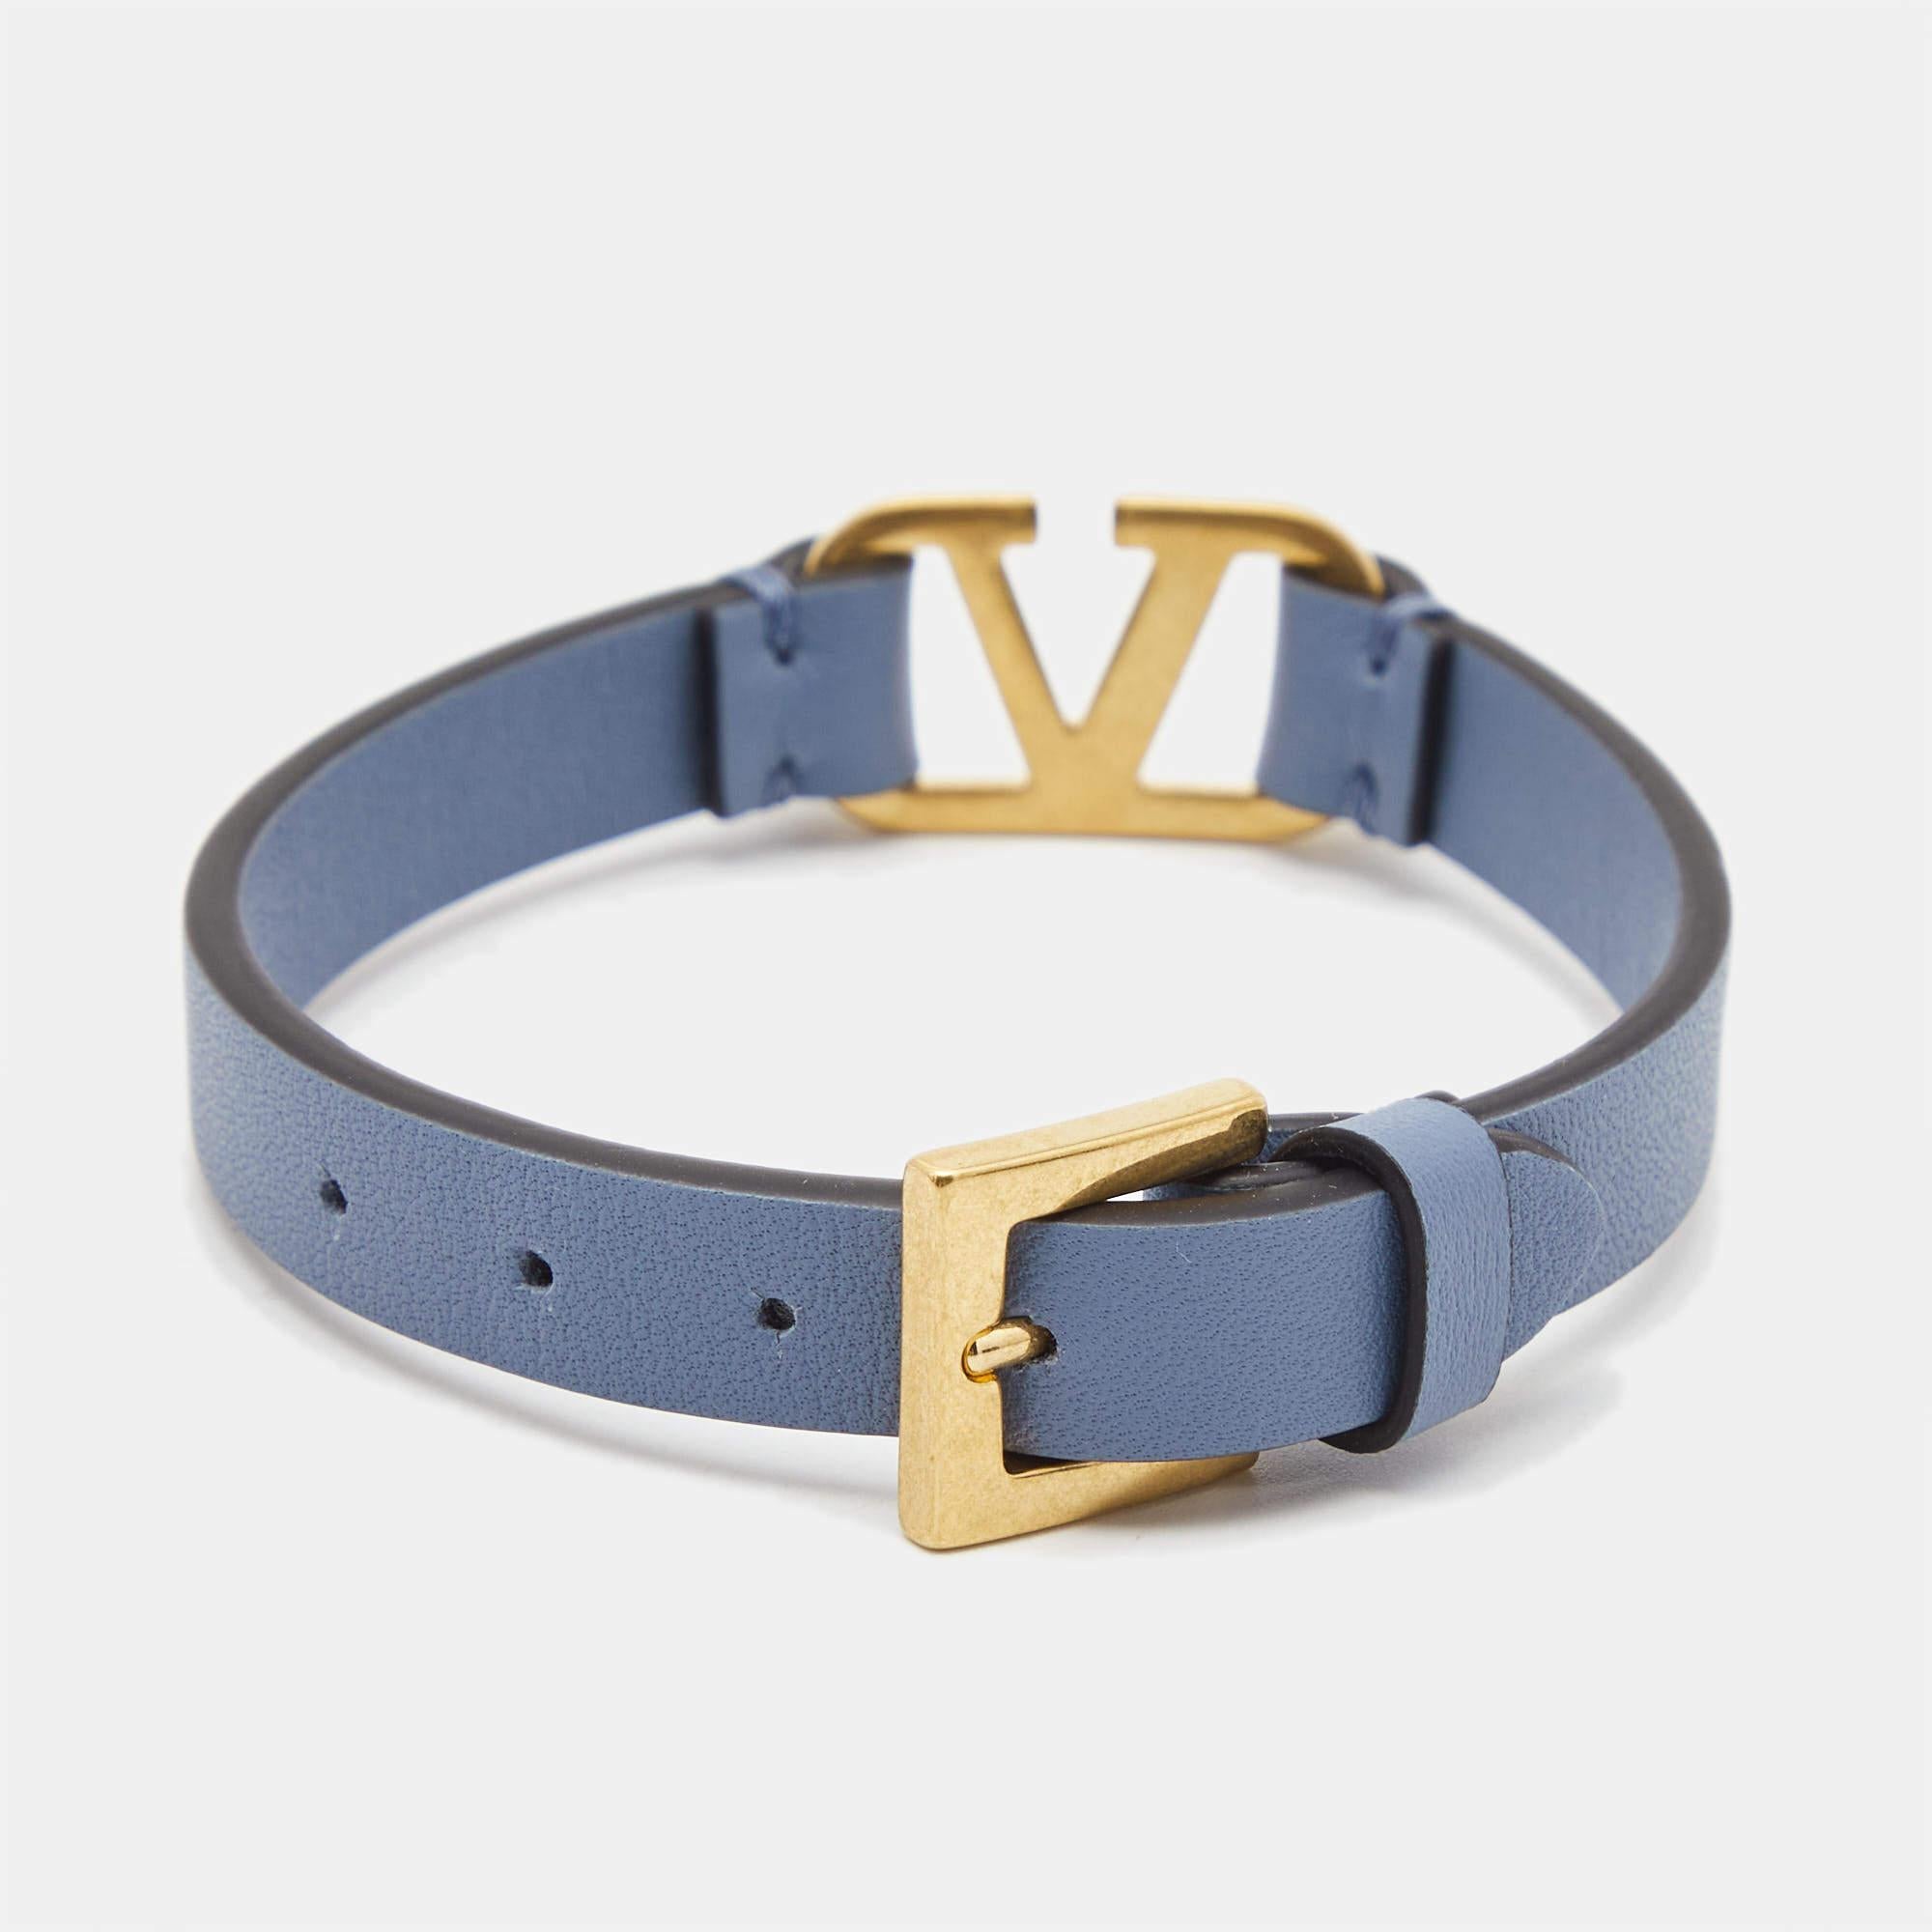 Valentino's loved VLogo motif is chosen as the highlight of this simple bracelet. The charm in gold-tone metal is held by a blue leather bracelet that can be secured to your wrist with the buckle clasp.

Includes: Original Dustbag, Original Box,